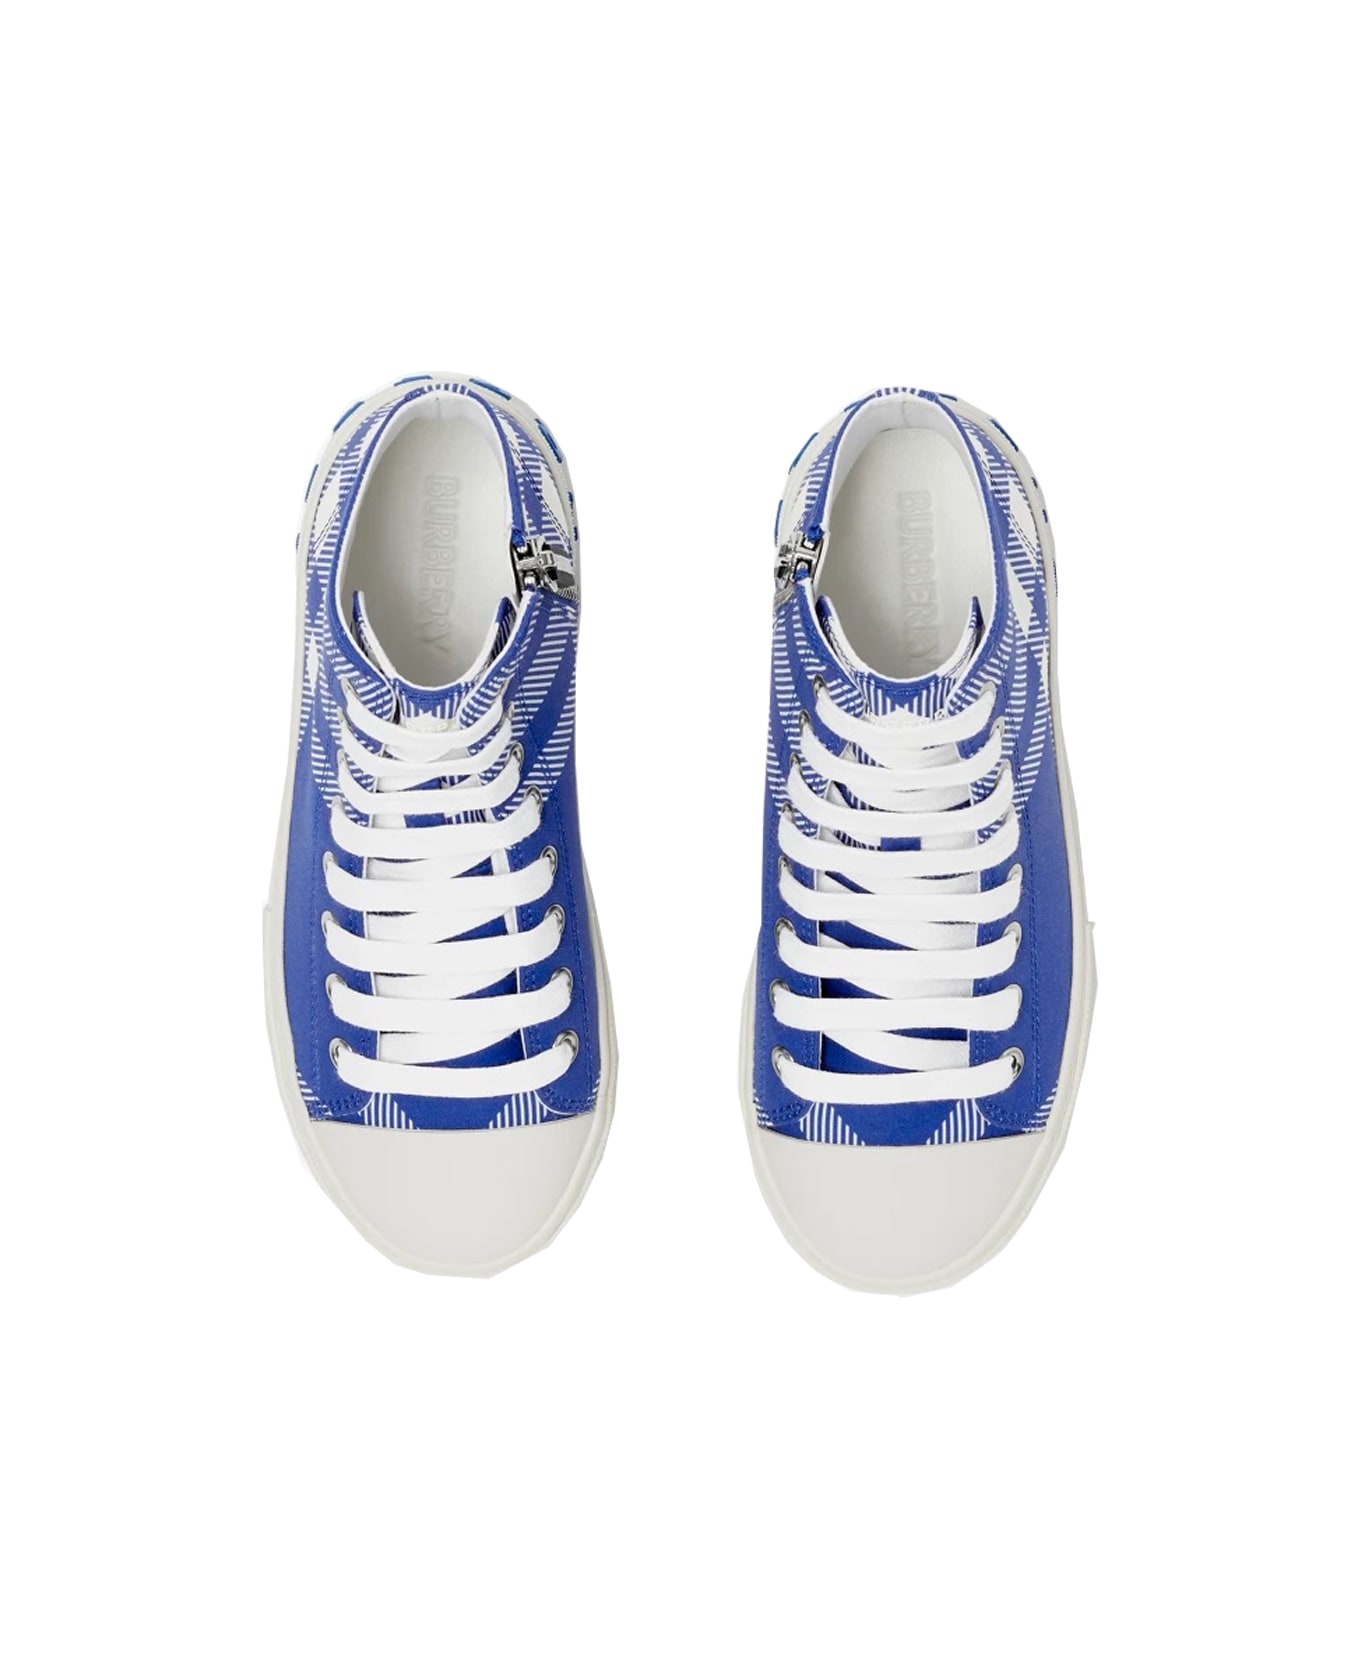 Burberry High Sneakers In Checked Cotton - Blue シューズ